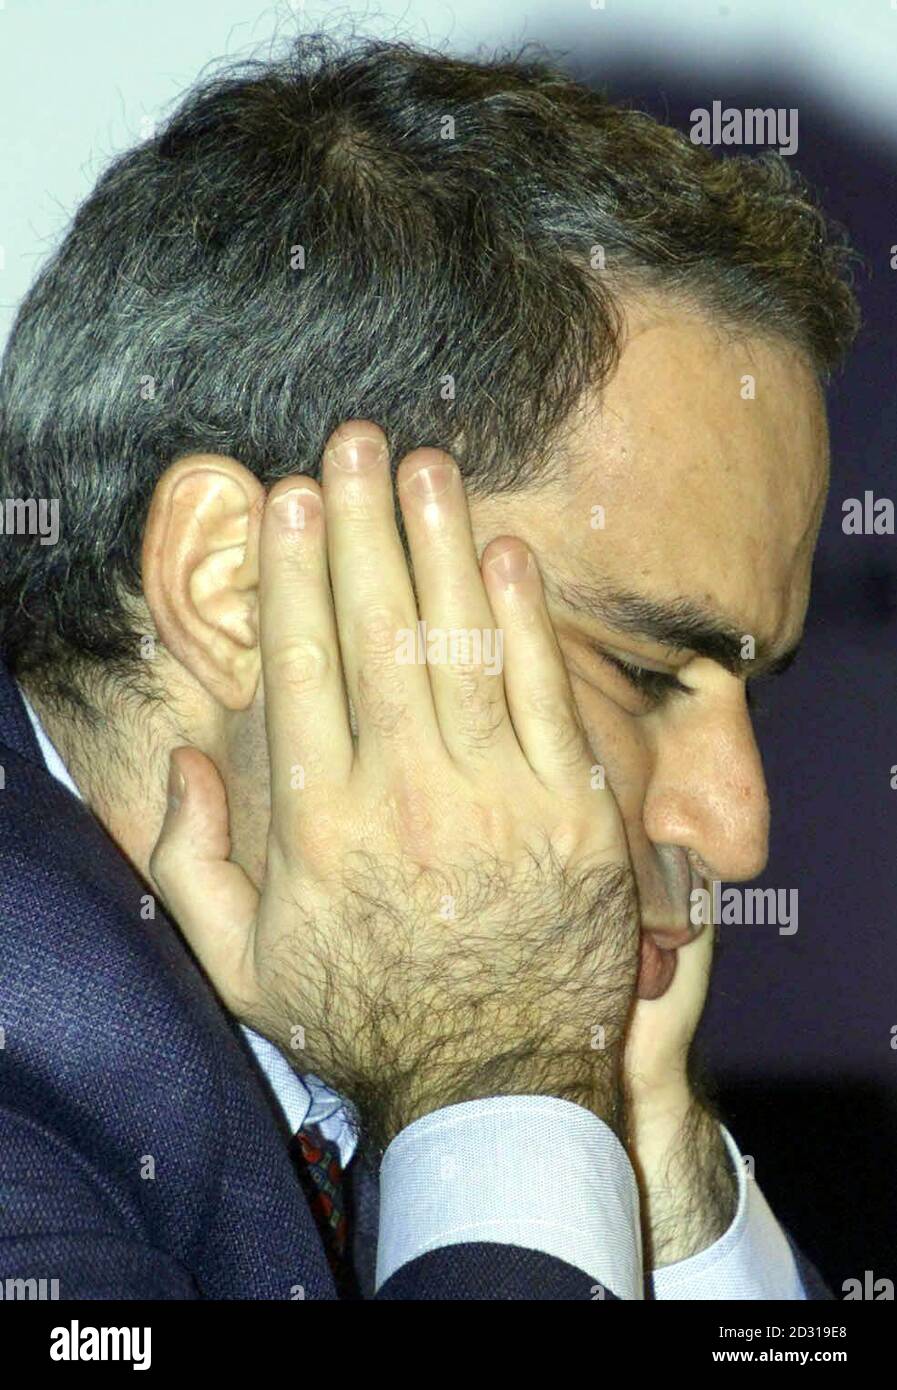 Garry Kasparov concentrates during his opening game against Vladimir Kramnik at the World Championship Chess finals at Riverside Studios in London. Stock Photo